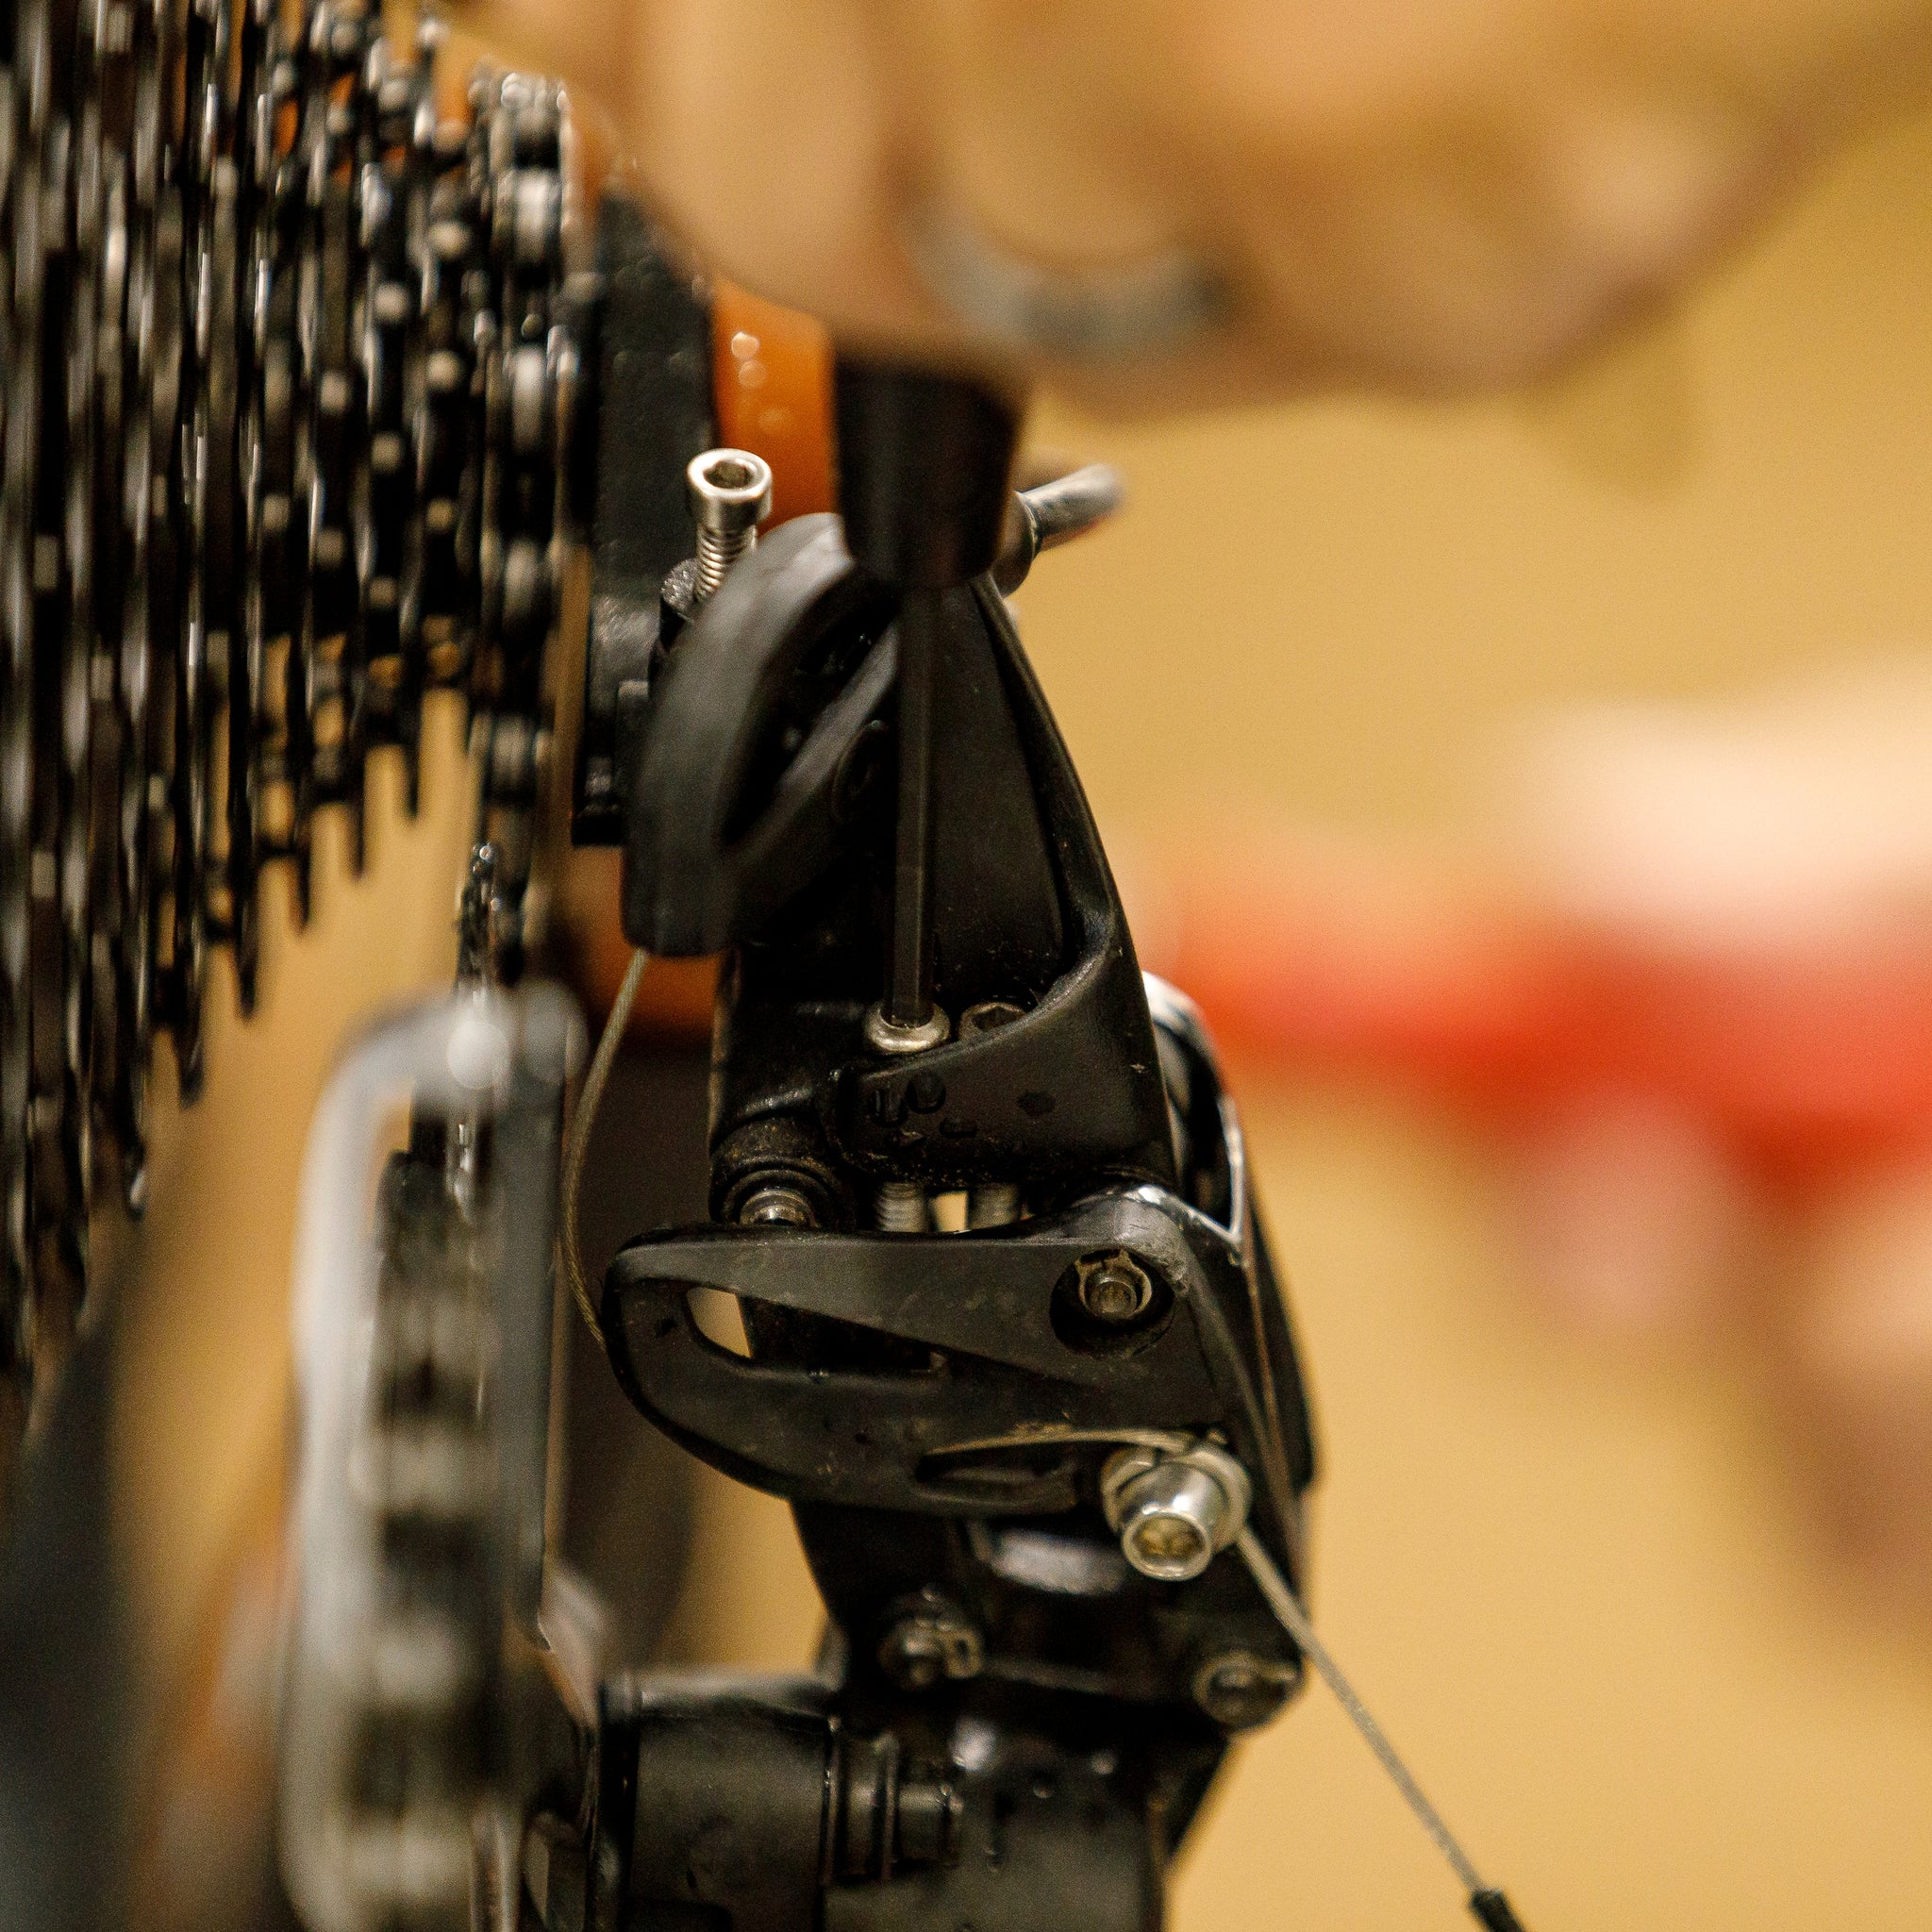 The Easy How-To Guide for Adjusting & Tuning a Mechanical Rear Derailleur